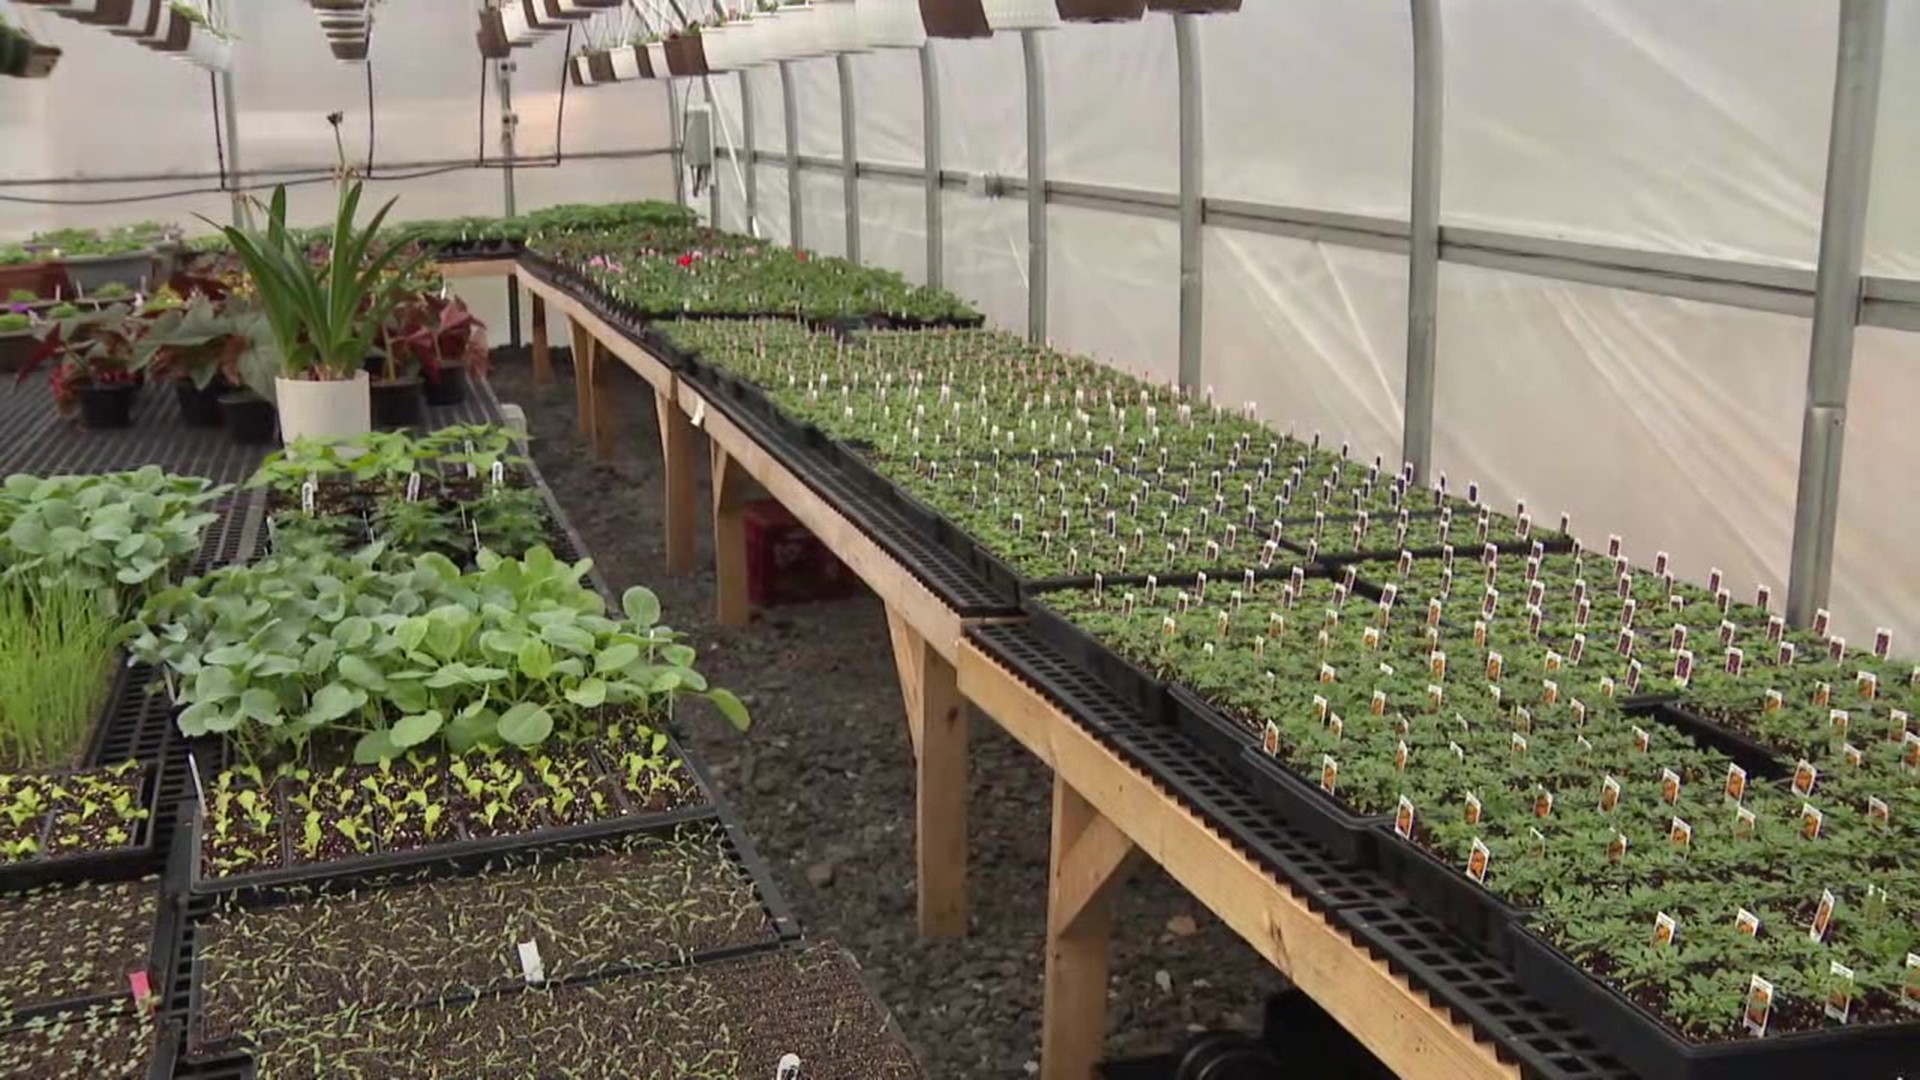 Nev & Nise Produce Greenhouse in Mahoning Township has been planting tons of flowers, herbs, and vegetables ahead of the season.